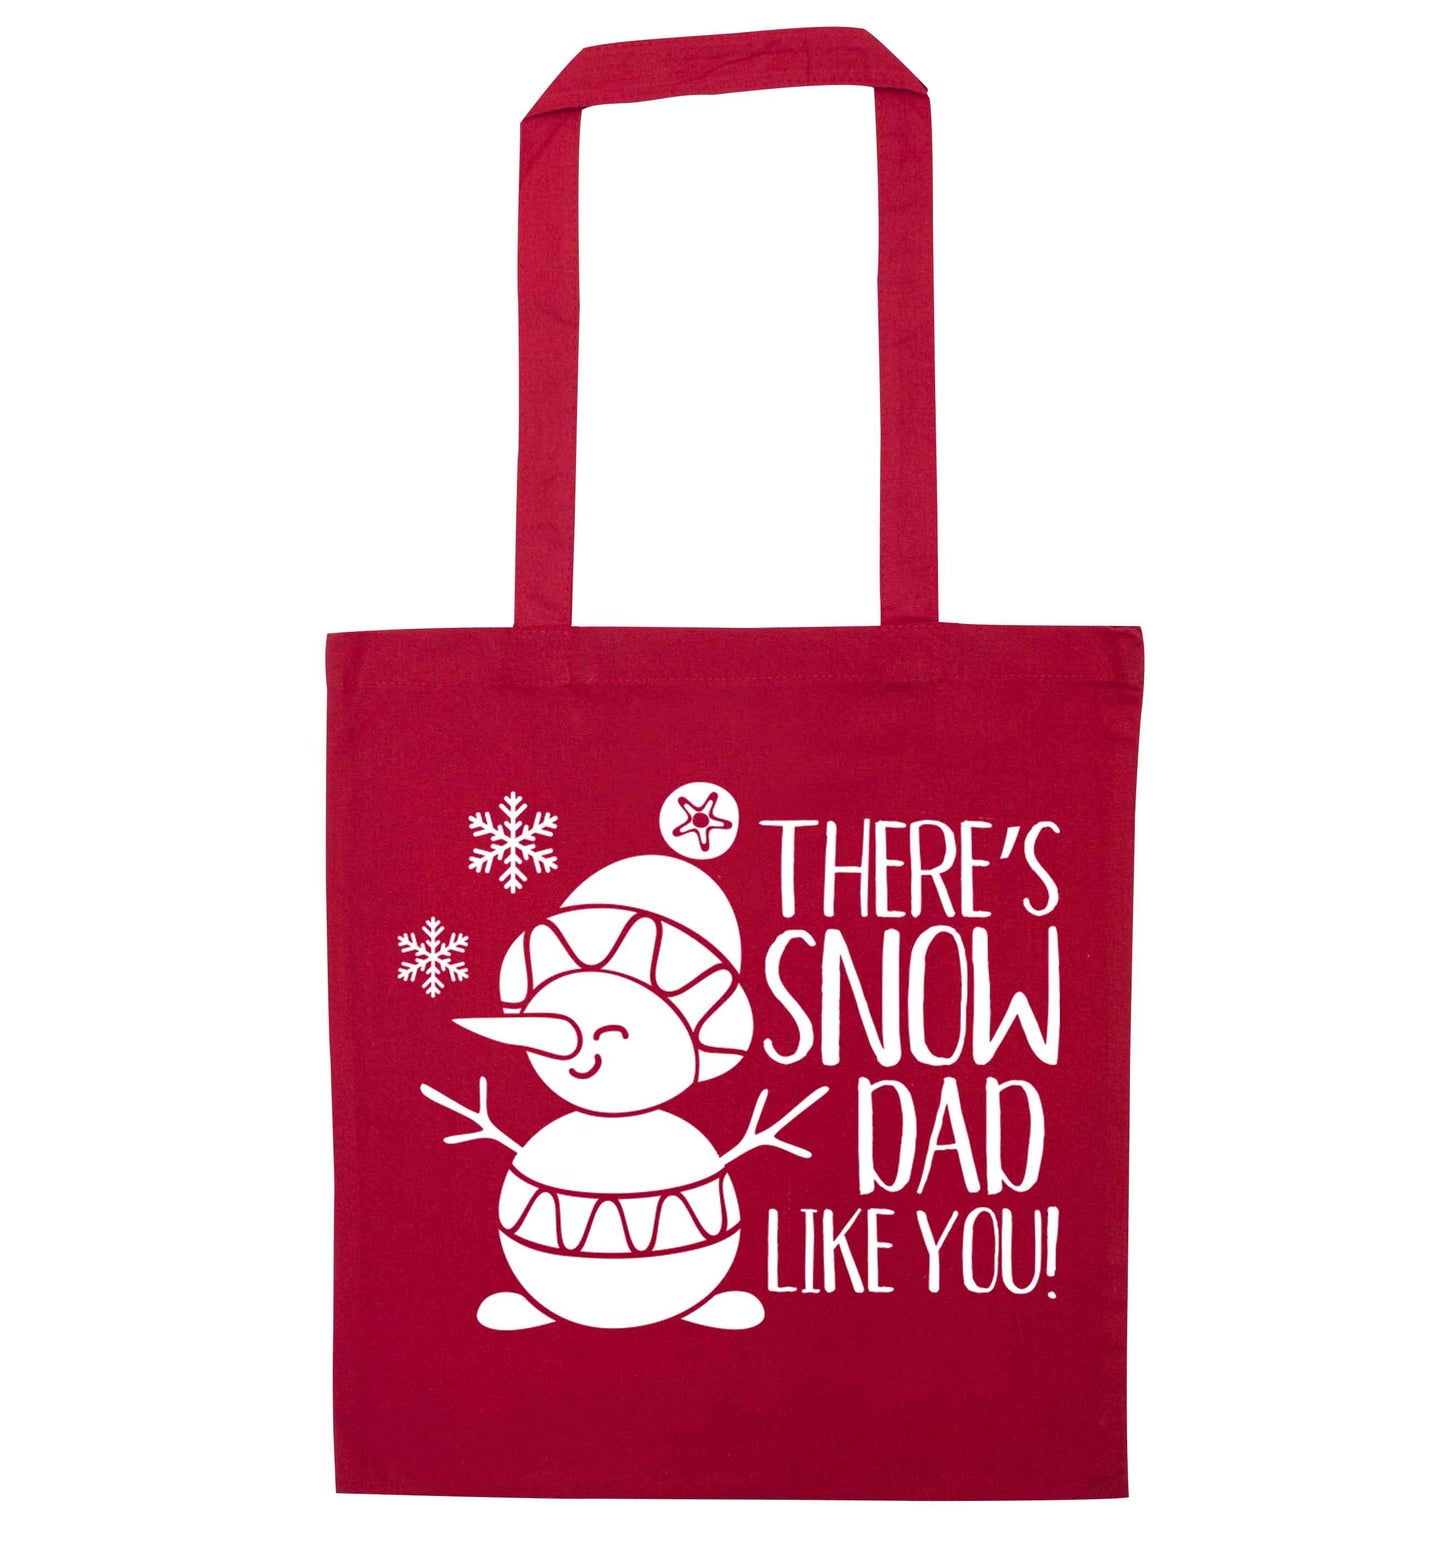 There's snow dad like you red tote bag